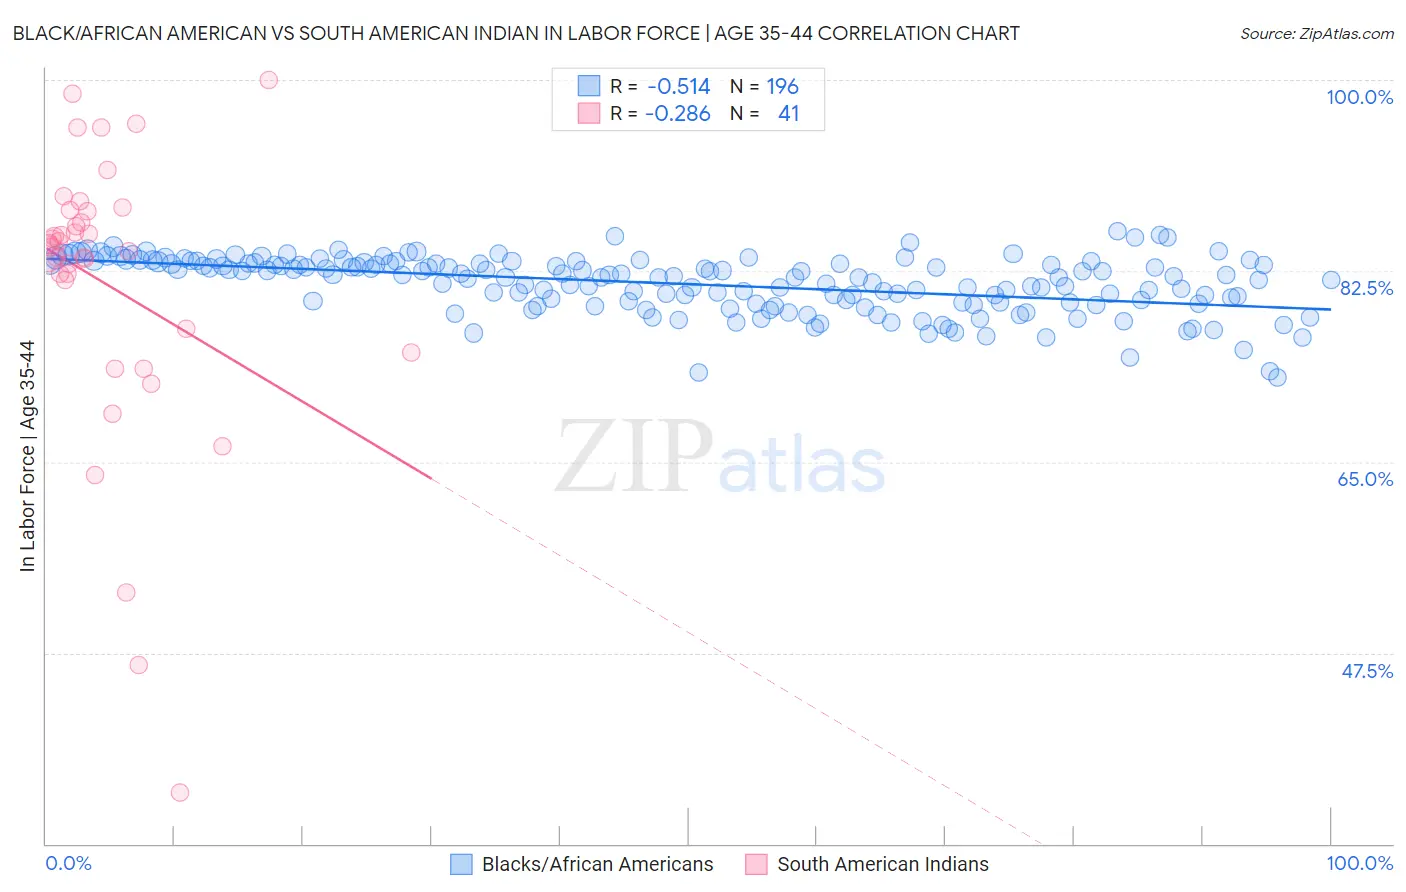 Black/African American vs South American Indian In Labor Force | Age 35-44